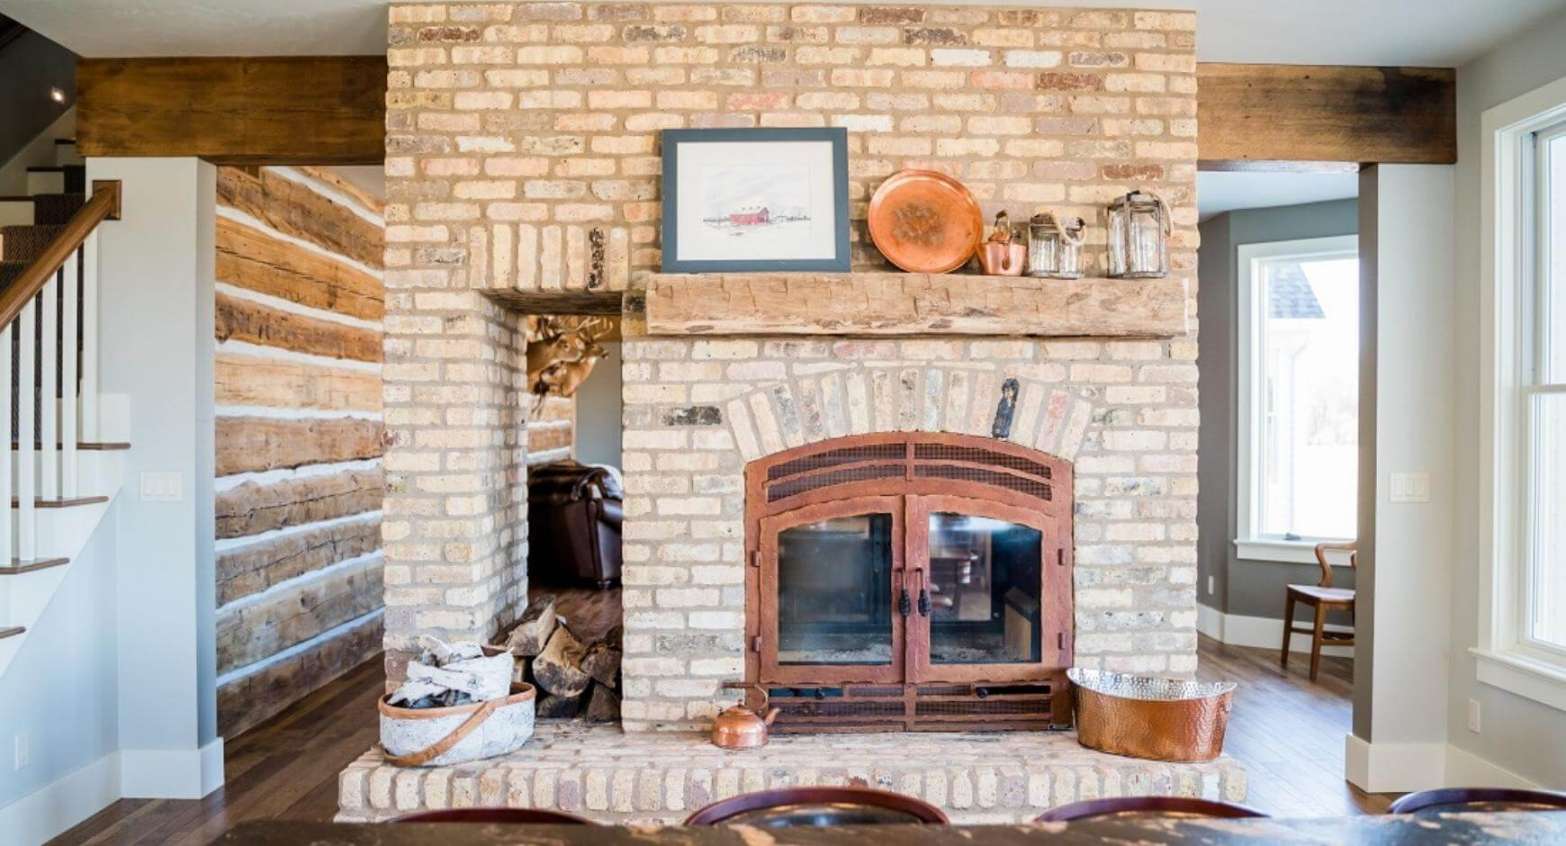 Best Firewood Storage Ideas for Your Wood Fireplace